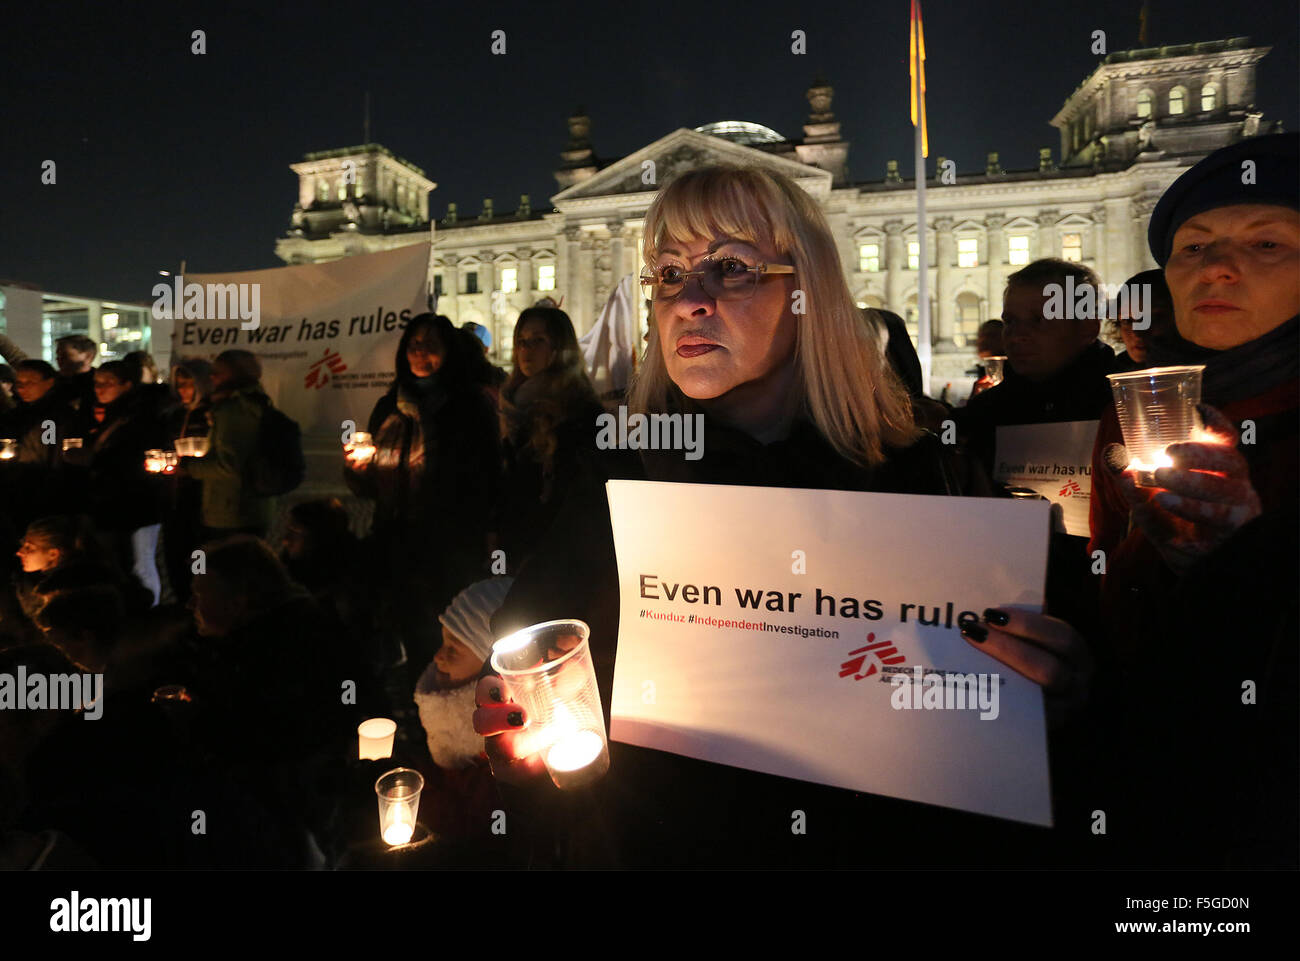 HANDOUT - A Handout datedd 3 November 2015 shows people taking part in a demonstration with candles burning outside the Reichstag in Berlin, Germany. They are burning as part of a memorial event of the international organisation Doctors without Borders, visible is a banner reads 'Even war has rules'.   A month after the attack on the Doctors without Borderds hospital in the northern Afghan city of Kunduz, organisers among the victims reiterated demand for an independent investigation. Photo:Stephanie Pilick/Ärzte ohne Grenzen/dpa      ATTENTION MUST BE USED WITH MANADATORY CREDIT: Stephanie Pi Stock Photo